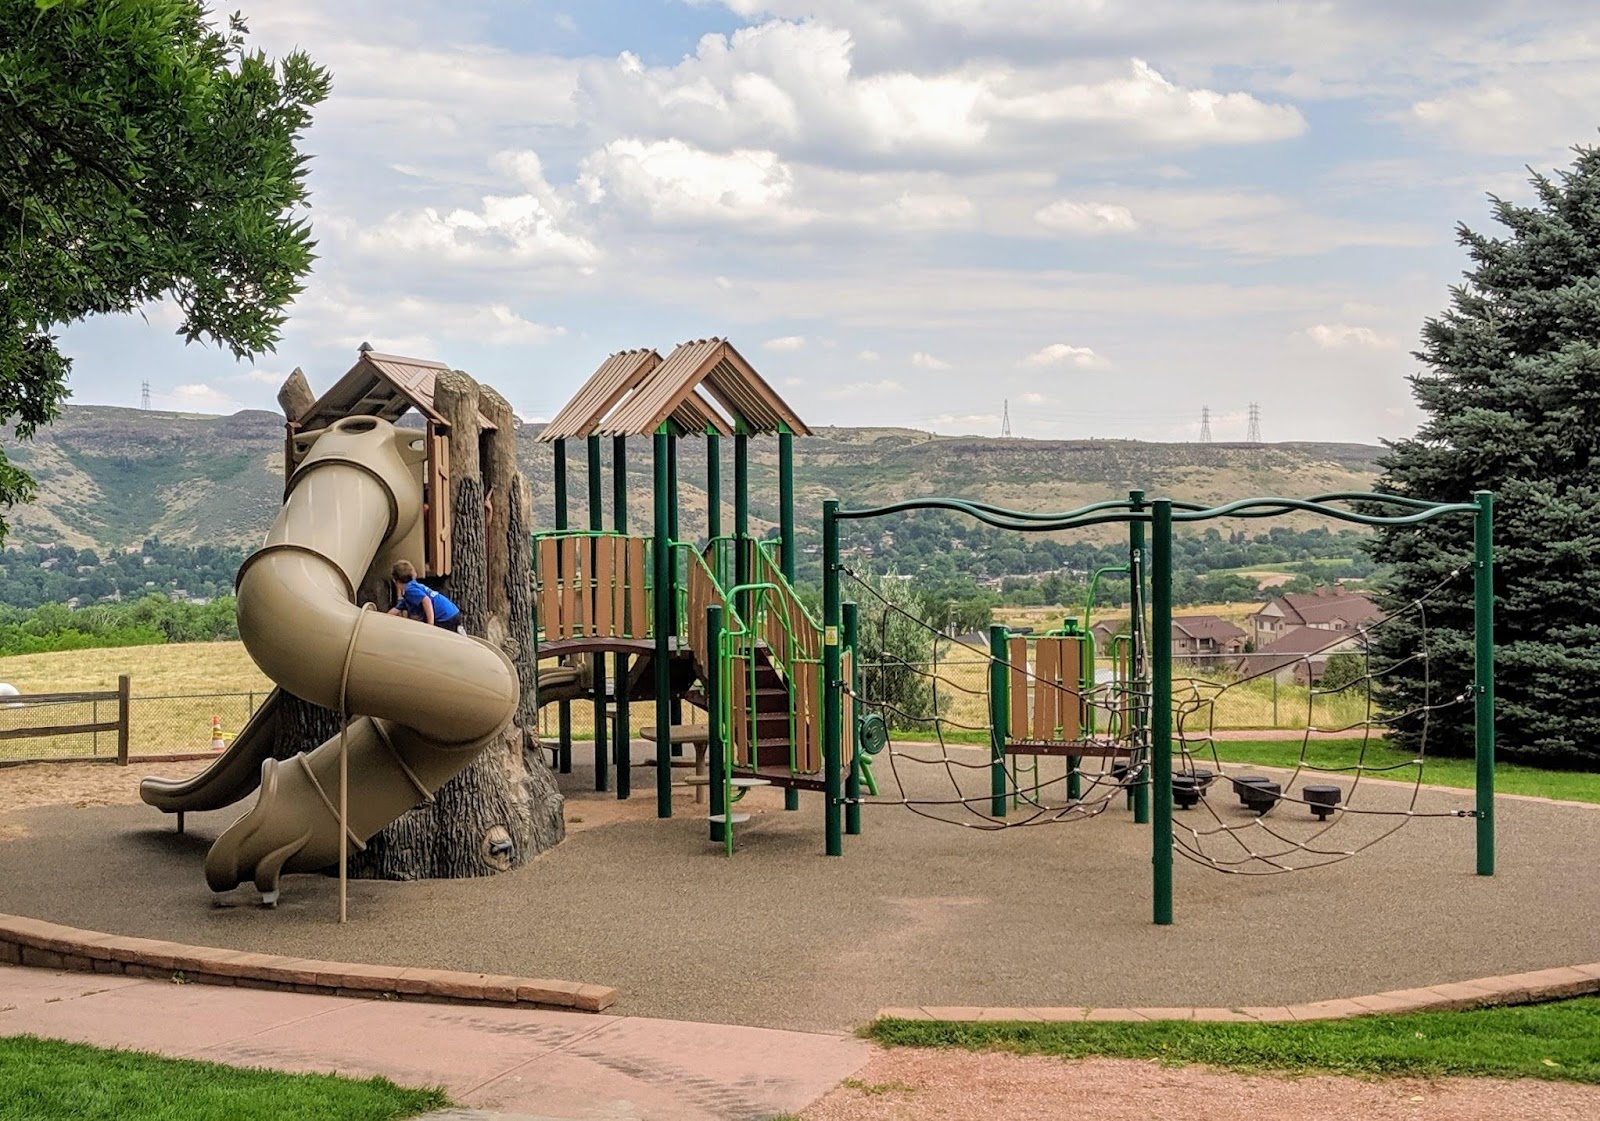 Awesome Golden Playgrounds Your Kids Will Love! The Golden Group Real Estate Advisors photo